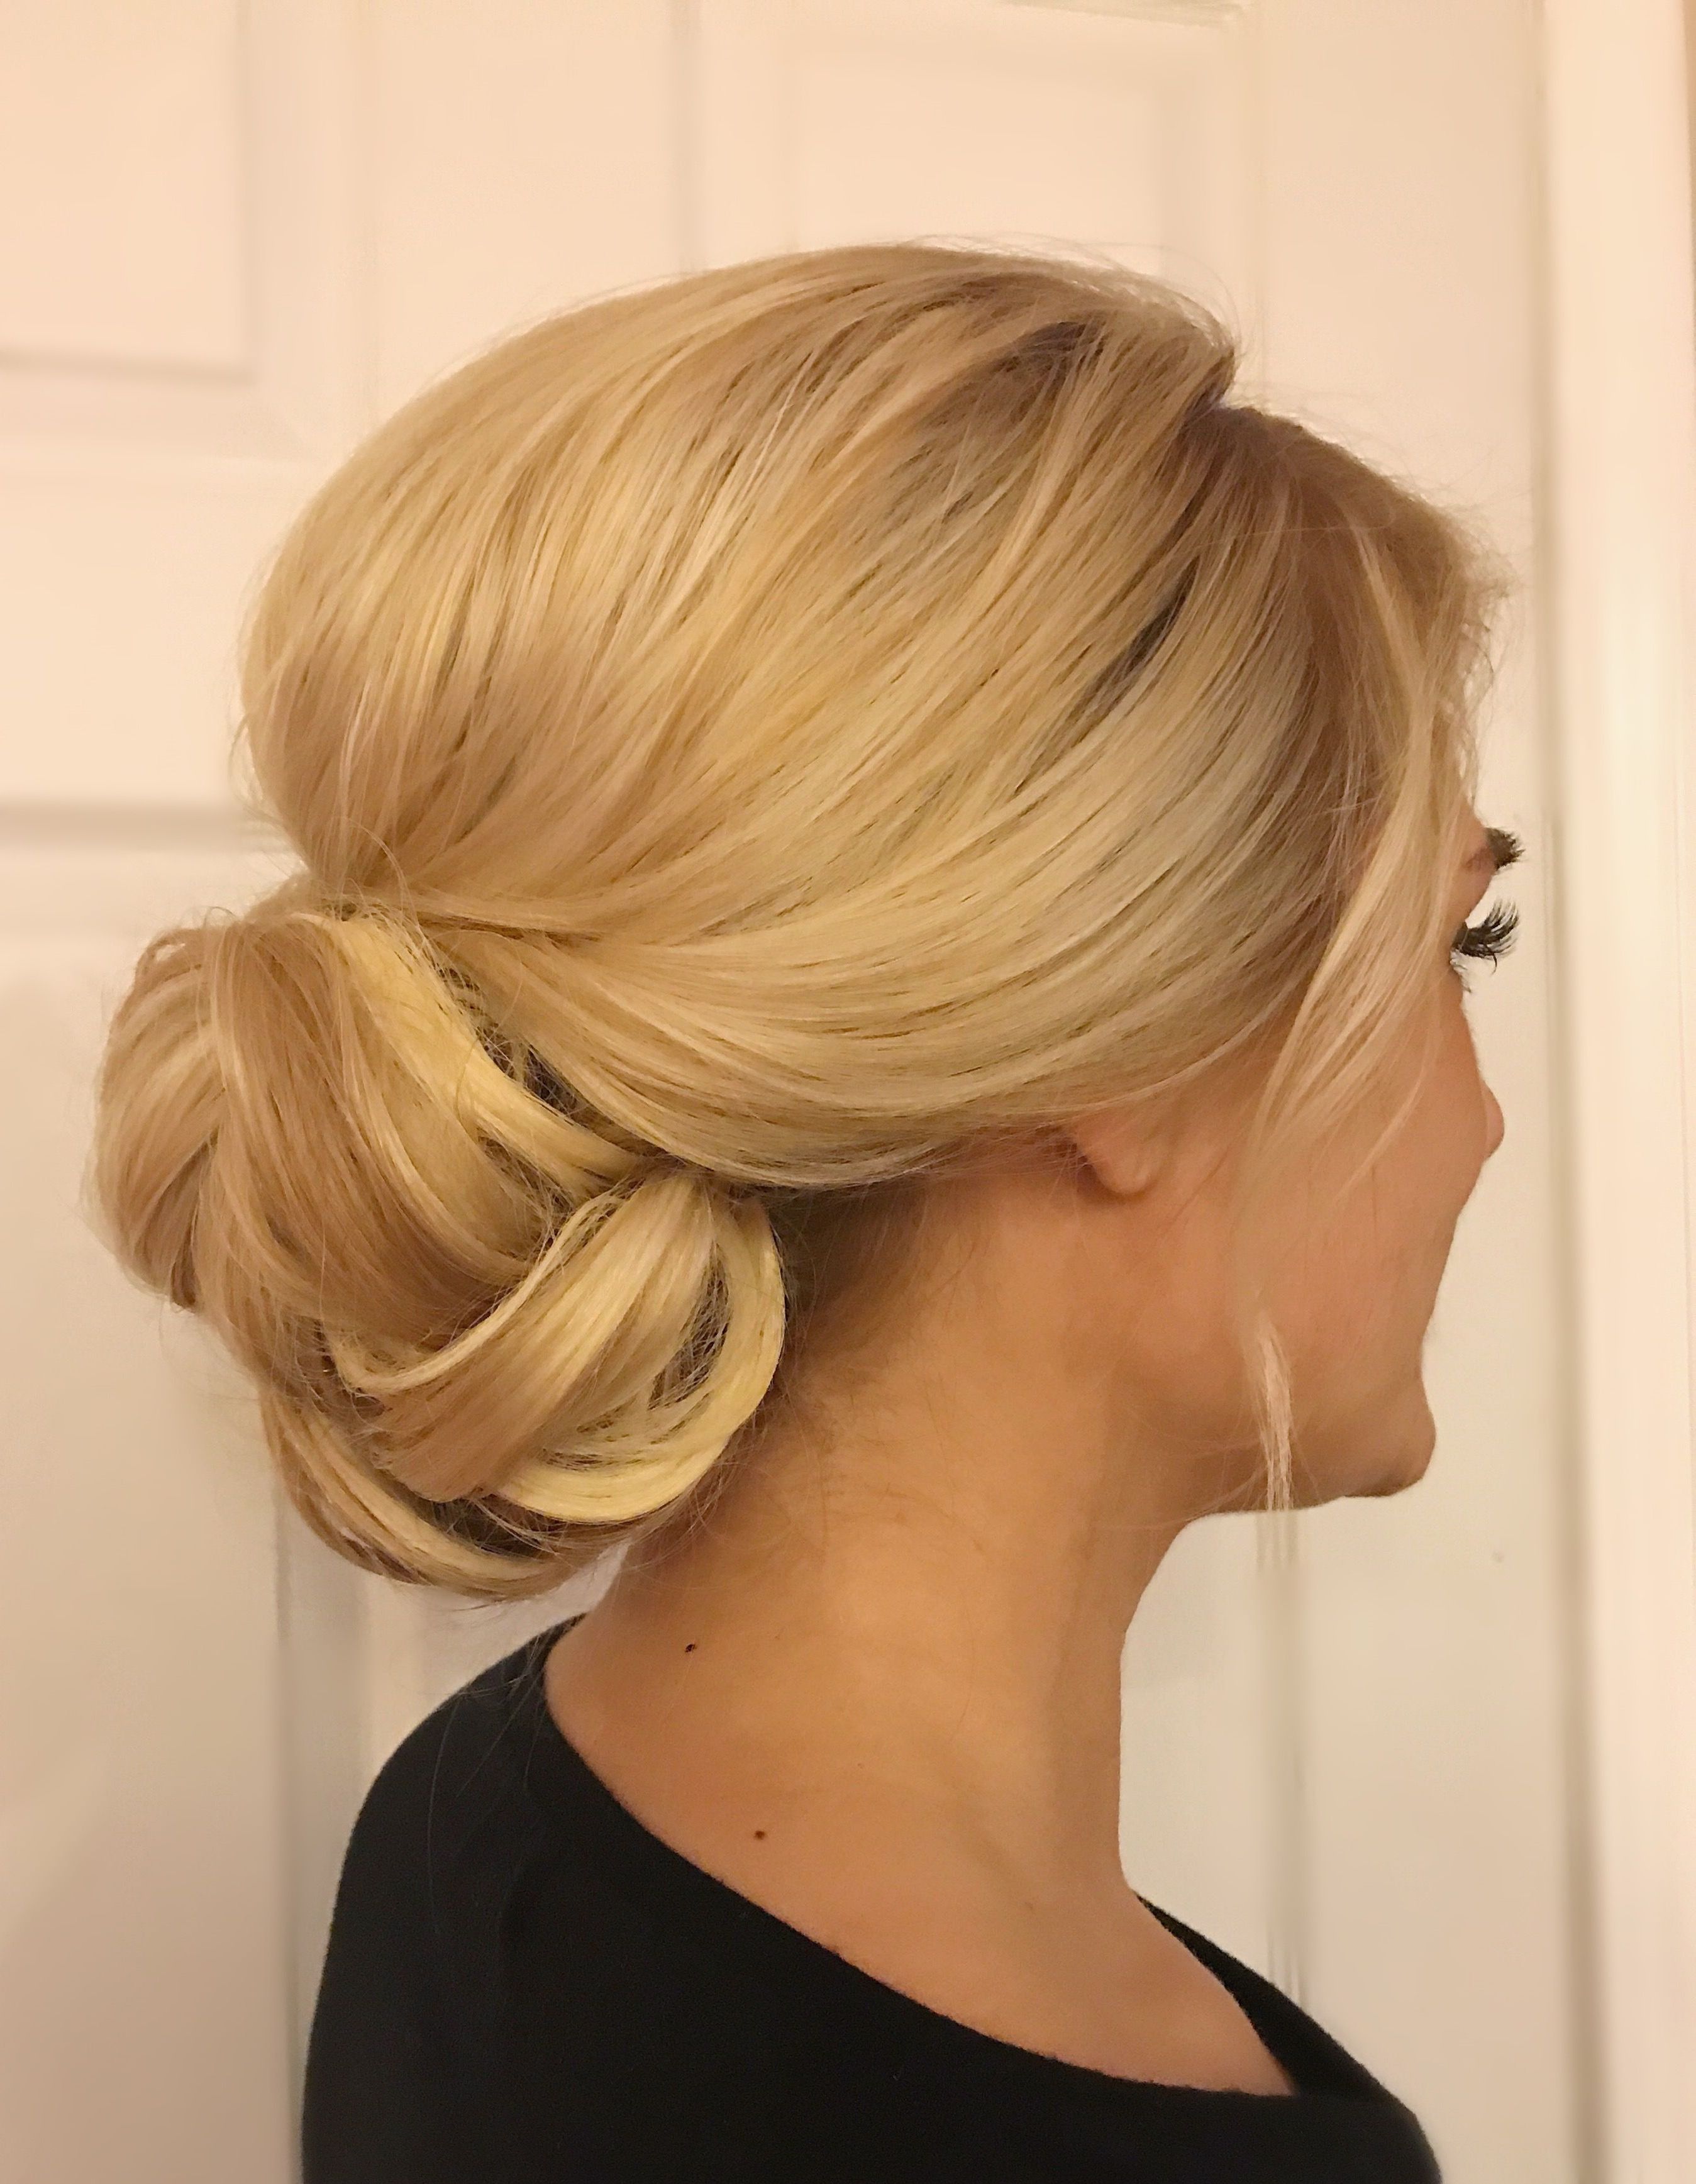 Famous Wavy Low Bun Bridal Hairstyles With Hair Accessory With Regard To Bridal Updo@shelbywhite Hmu, Low Bun, Wedding Hair (View 14 of 20)